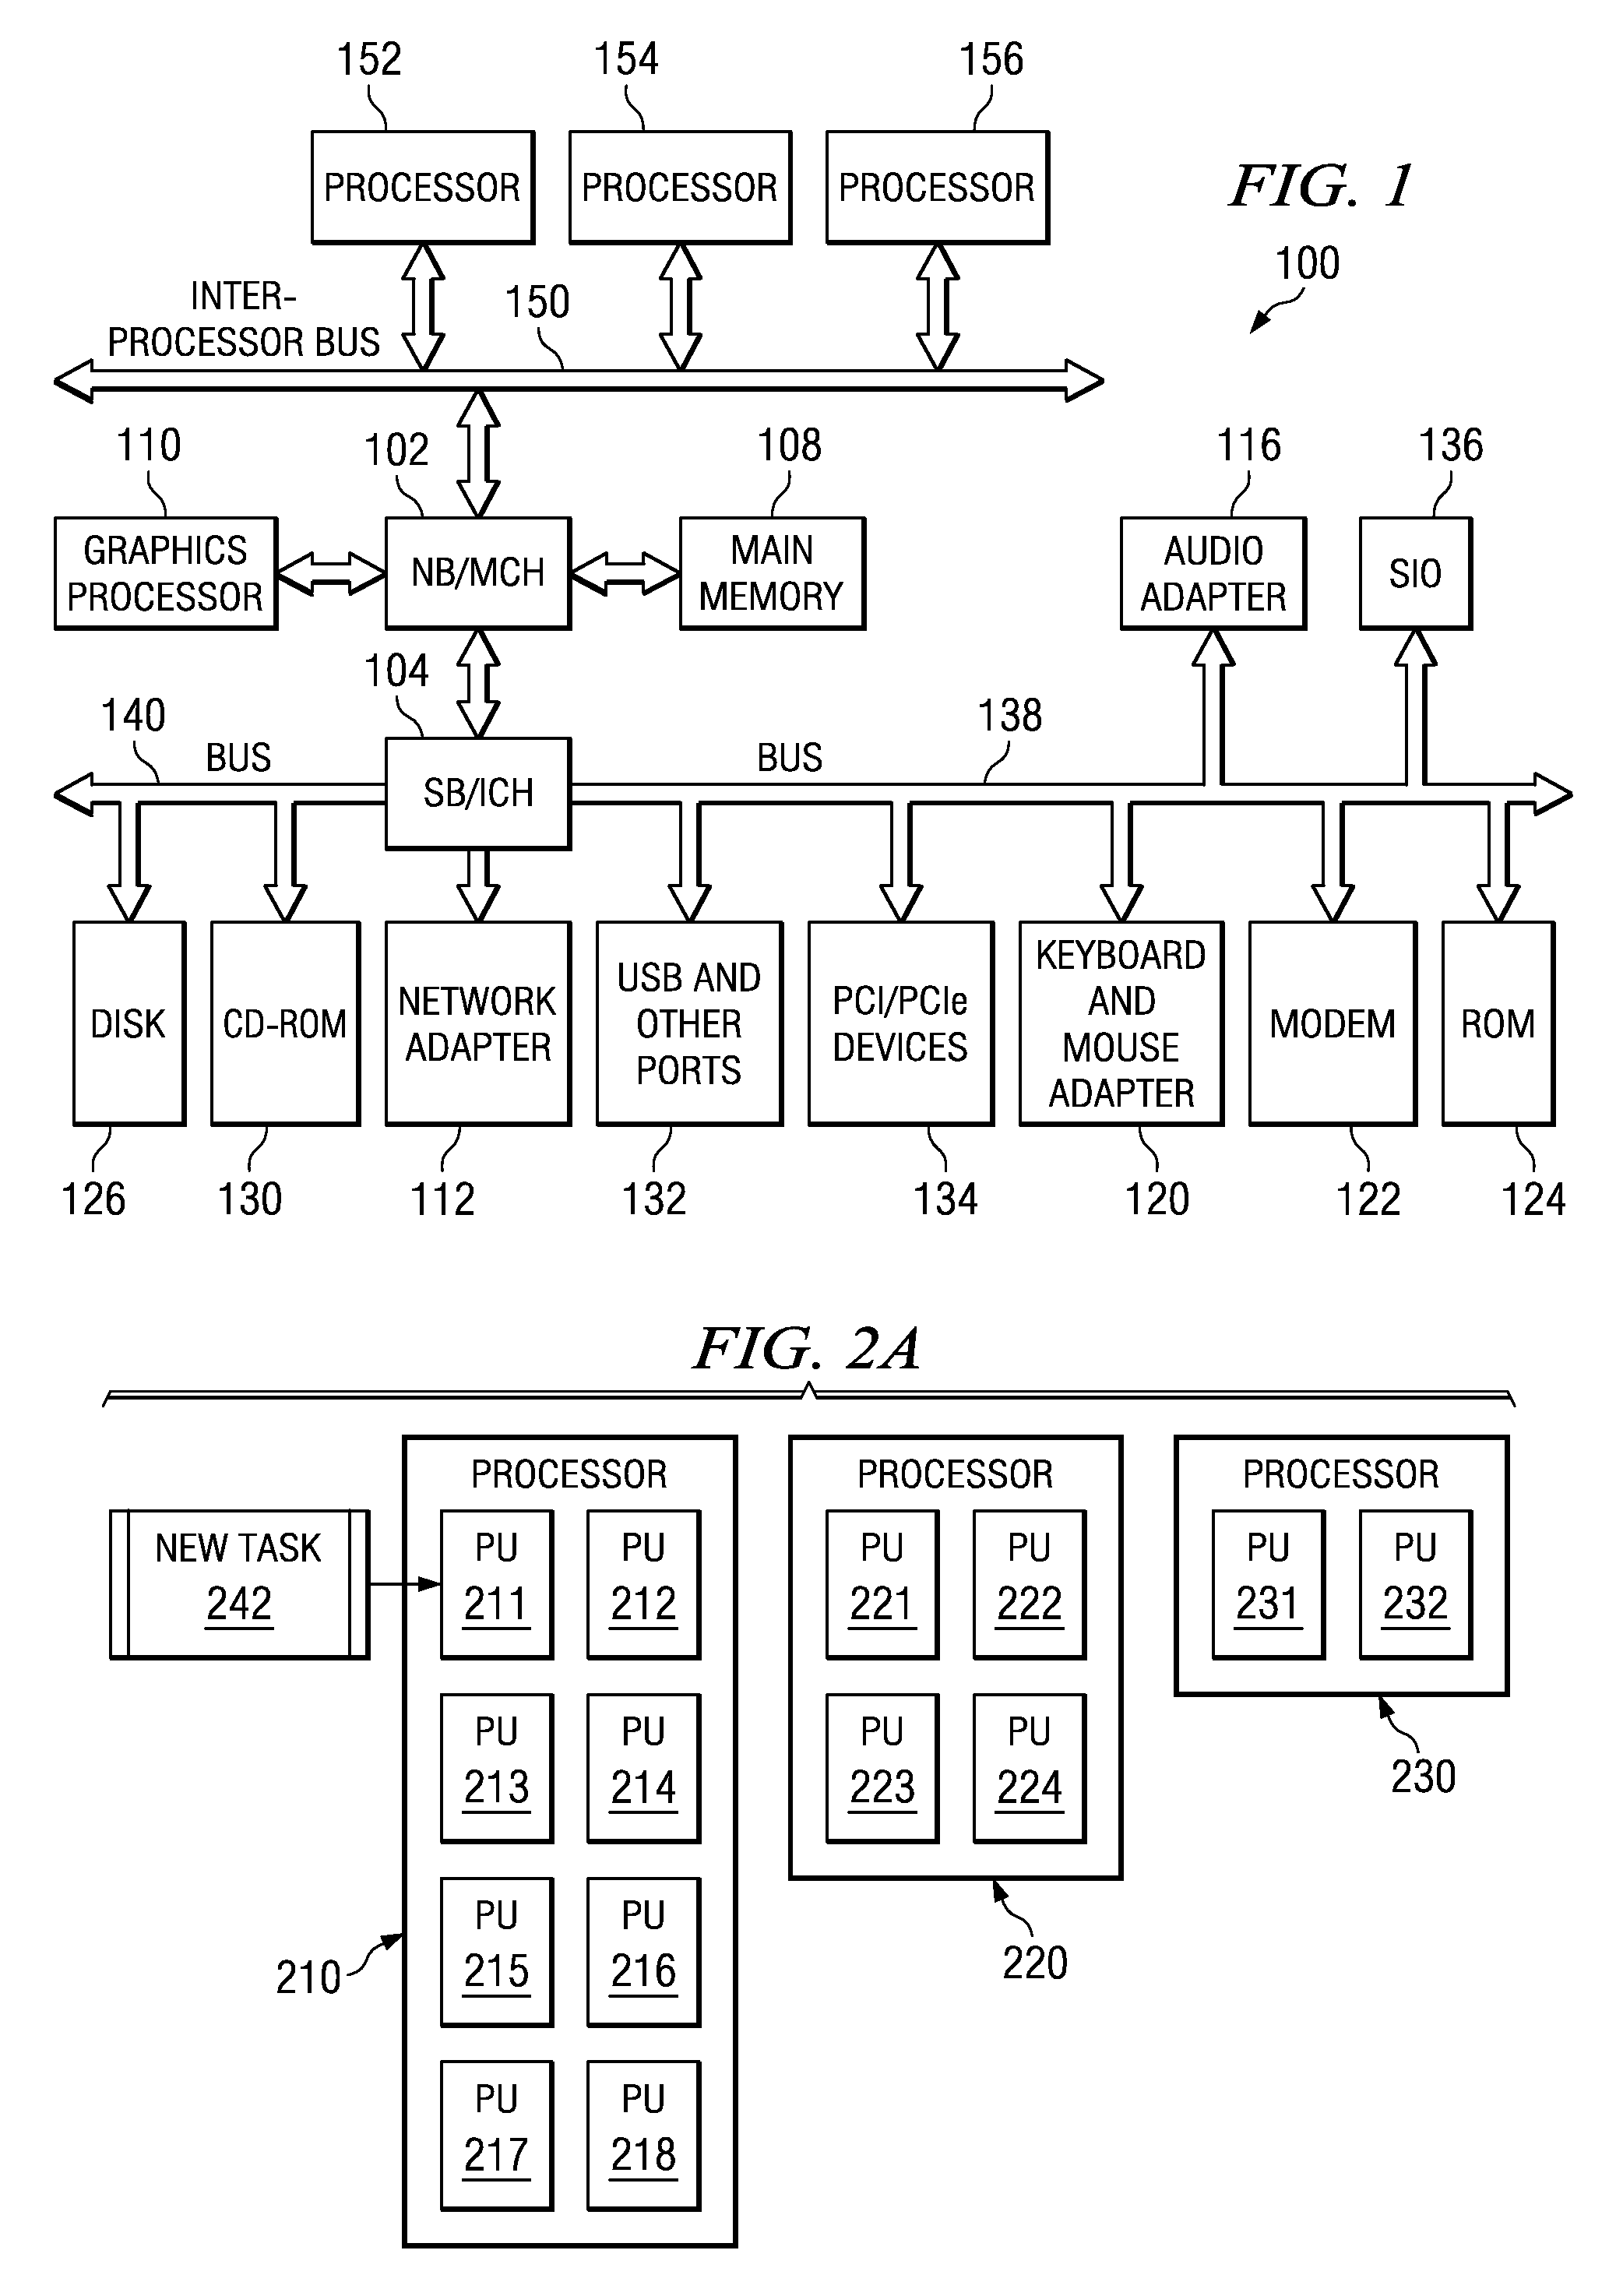 Scheduling tasks across multiple processor units of differing capacity